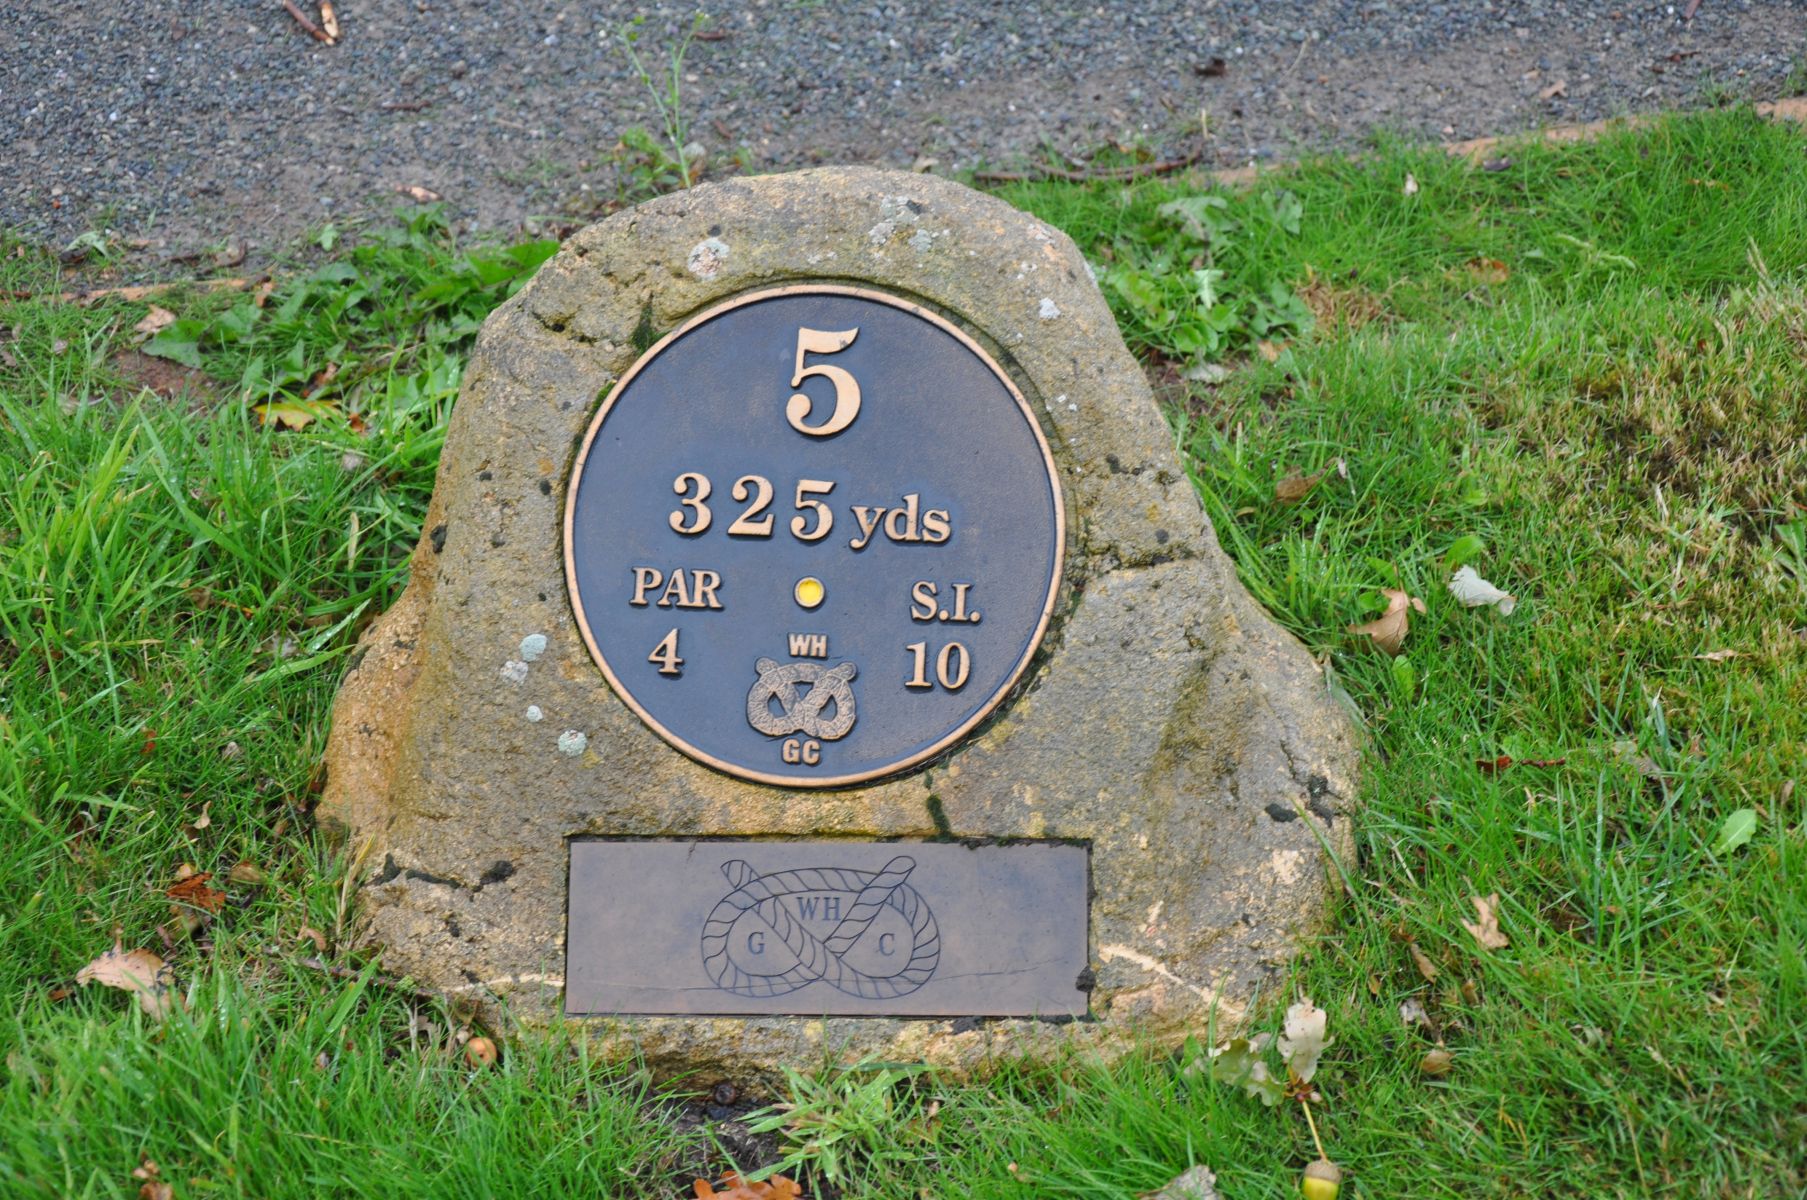 THE YELLOW TEE MARKER FOR HOLE FIVE